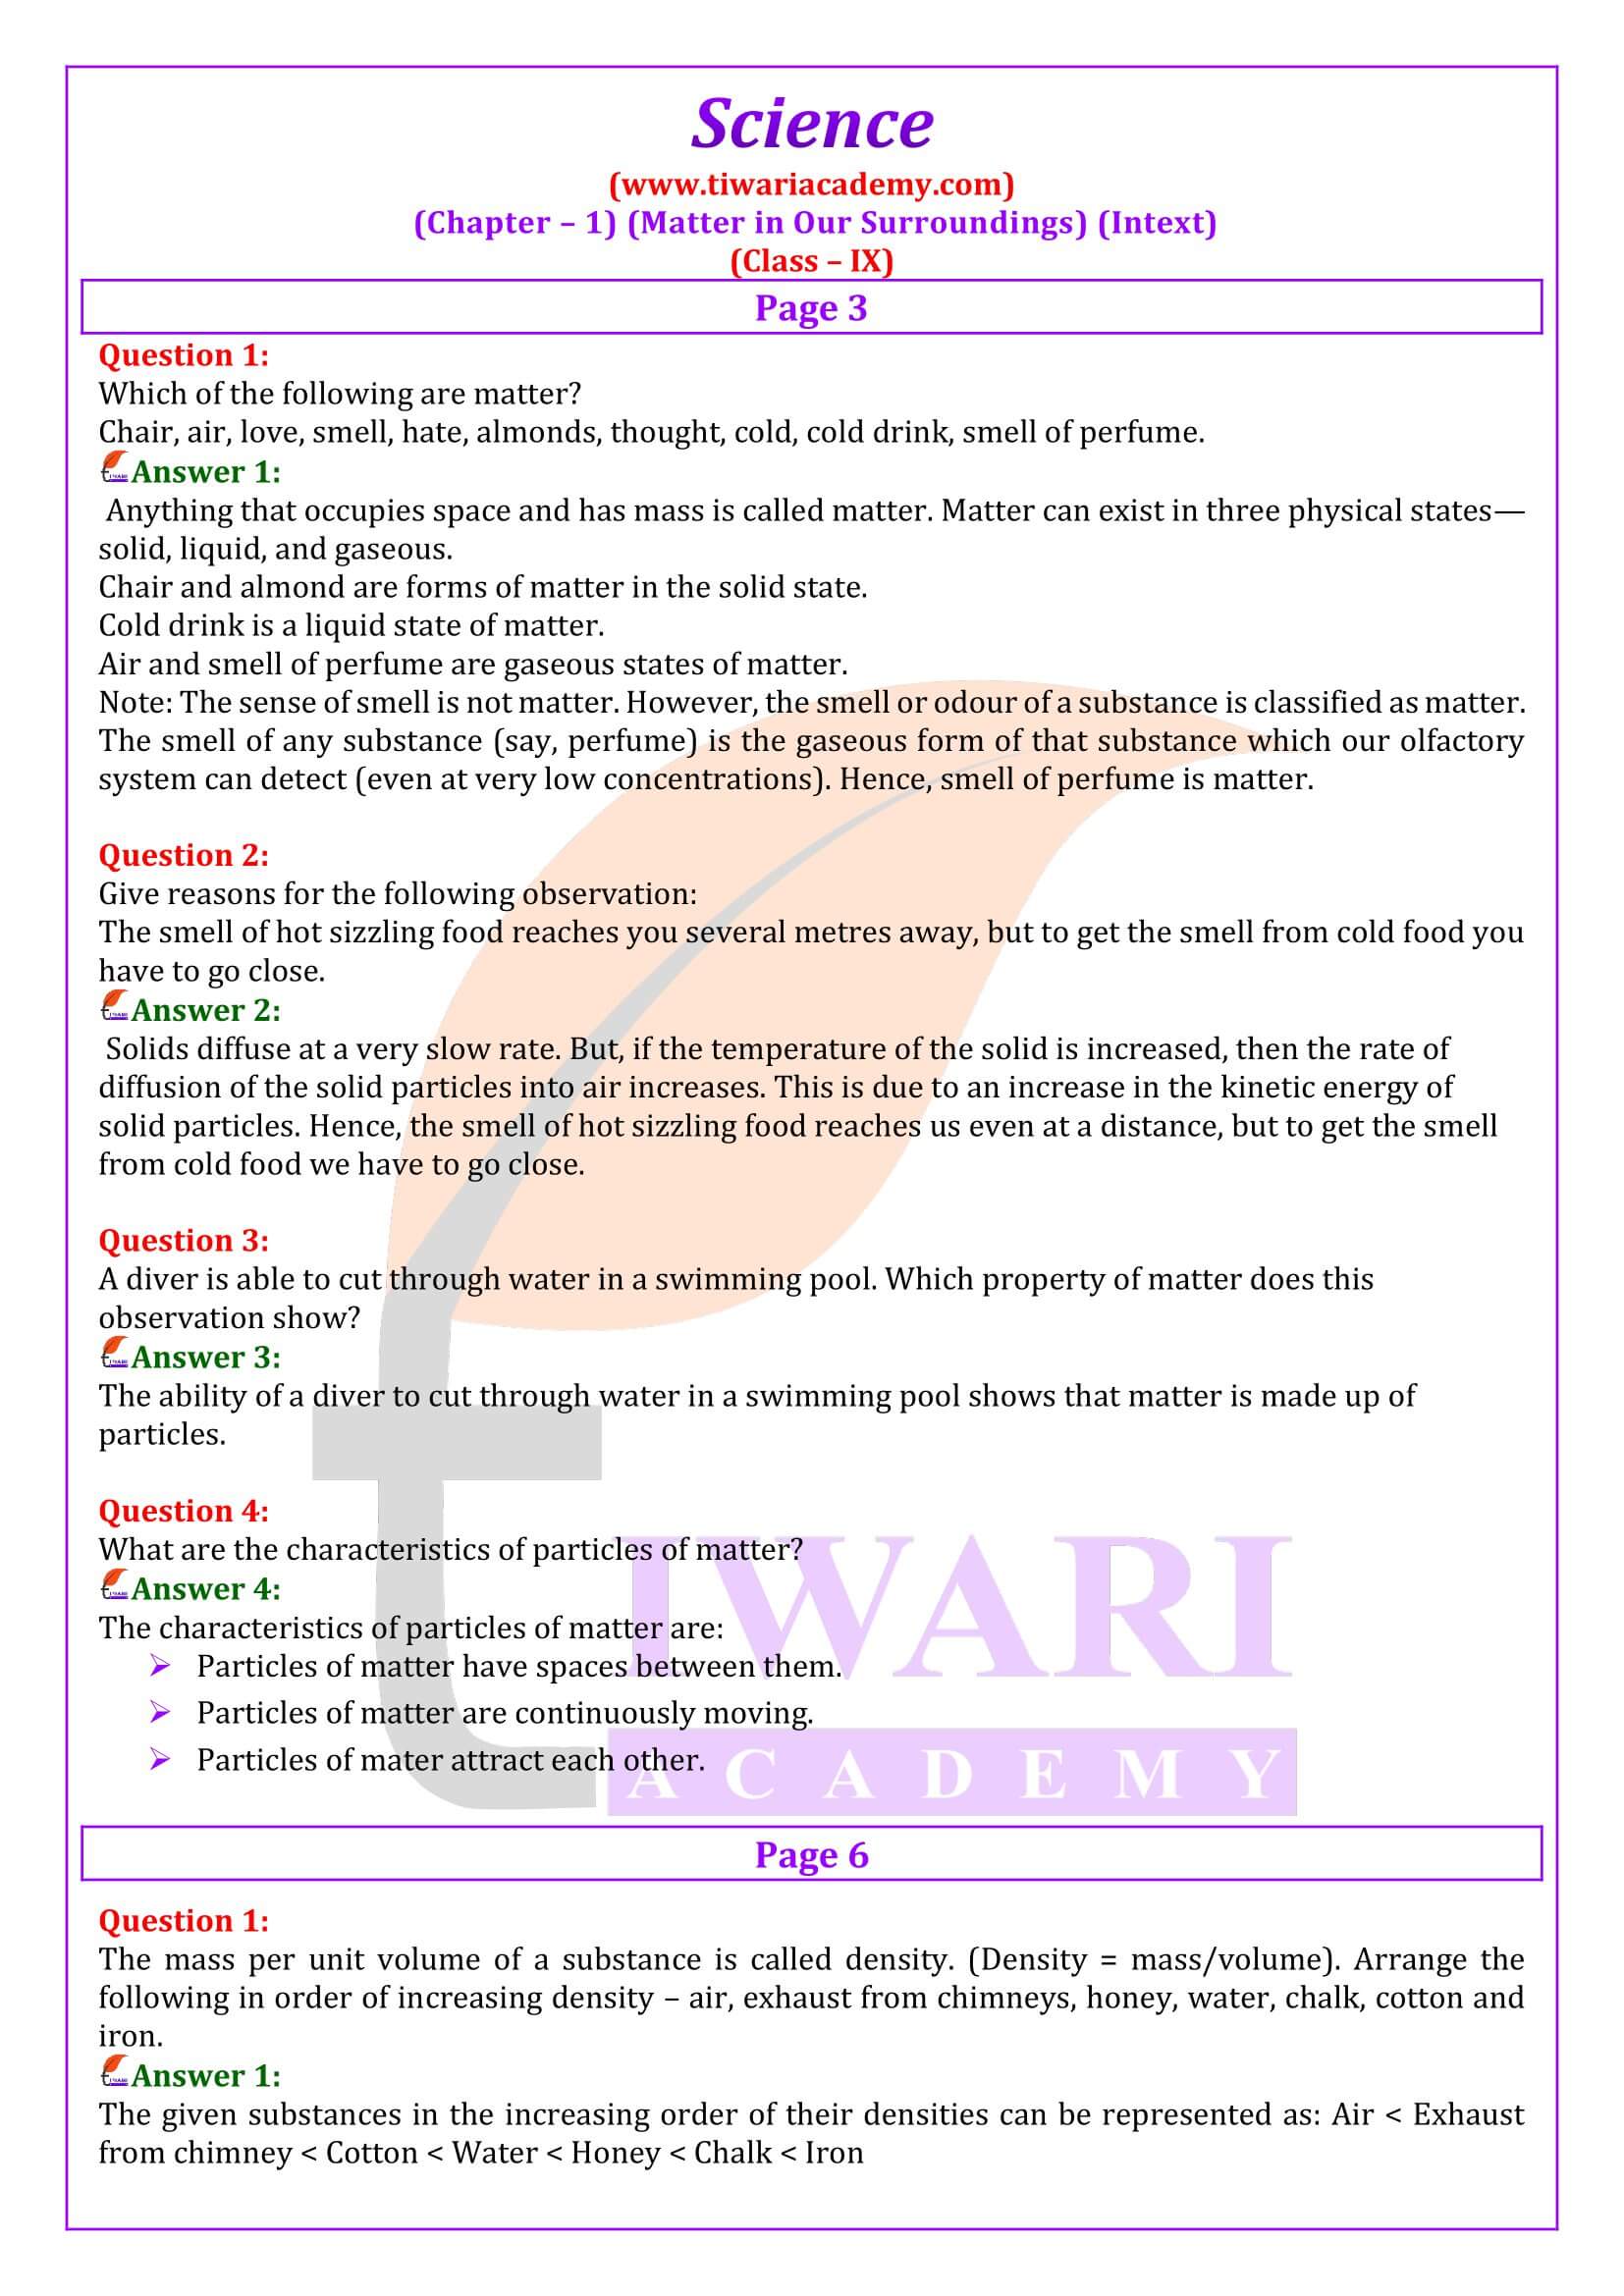 NCERT Solutions for Class 9 Science Chapter 1 Question Answers